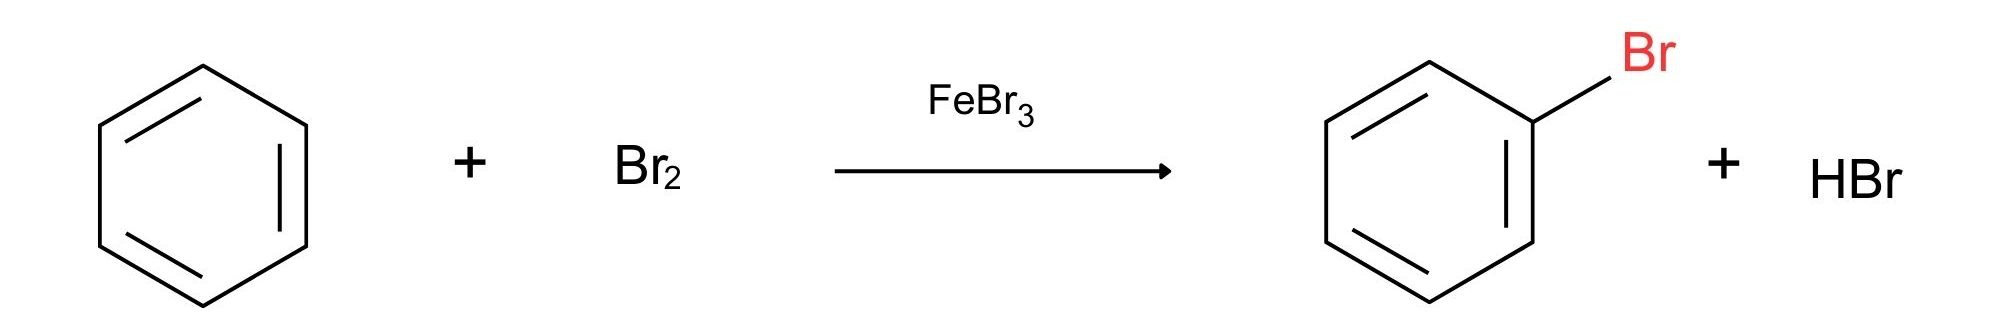 A reaction showing the structures involved in a general electrophilic aromatic substitution of benzene. Bromine is reacted with benzene using FeBr as a catalyst yielding bromobenzene and hydrogen bromide as products.